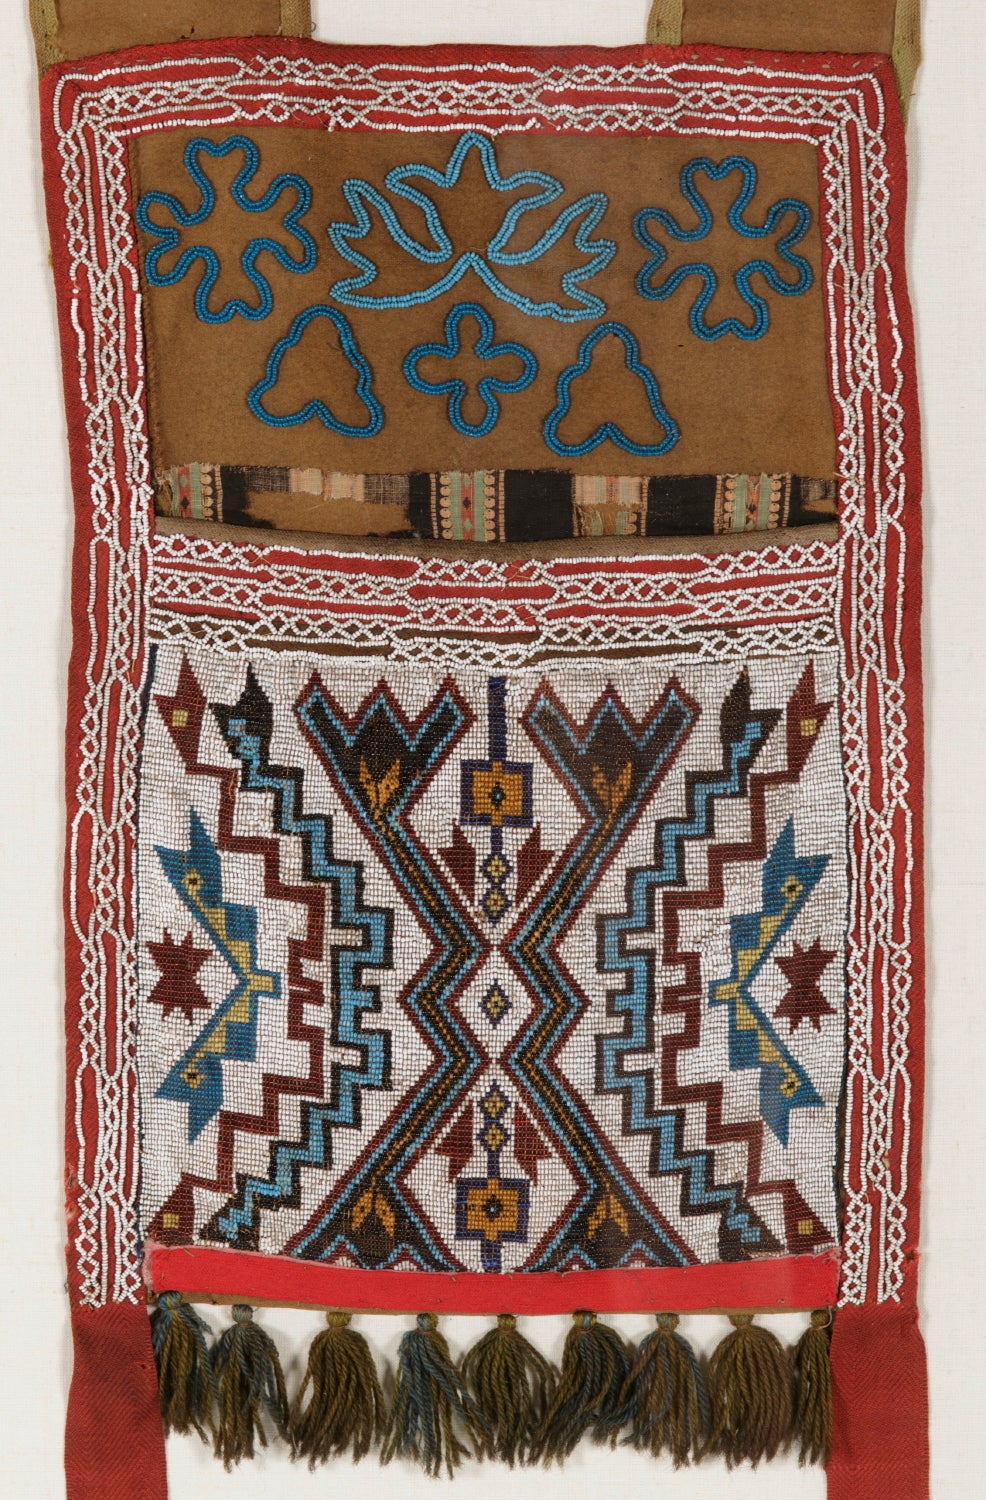 BEADED, NATIVE AMERICAN BANDOLIER BAG, WITH GEOMETRIC AND FLORAL PATTERNS, CHIPPEWA OR WINNEBAGO INDIAN NATION, circa 1880:

Beaded, native American, bandolier bag, made ca 1880.  The layout and designs utilized I would attribute as being of